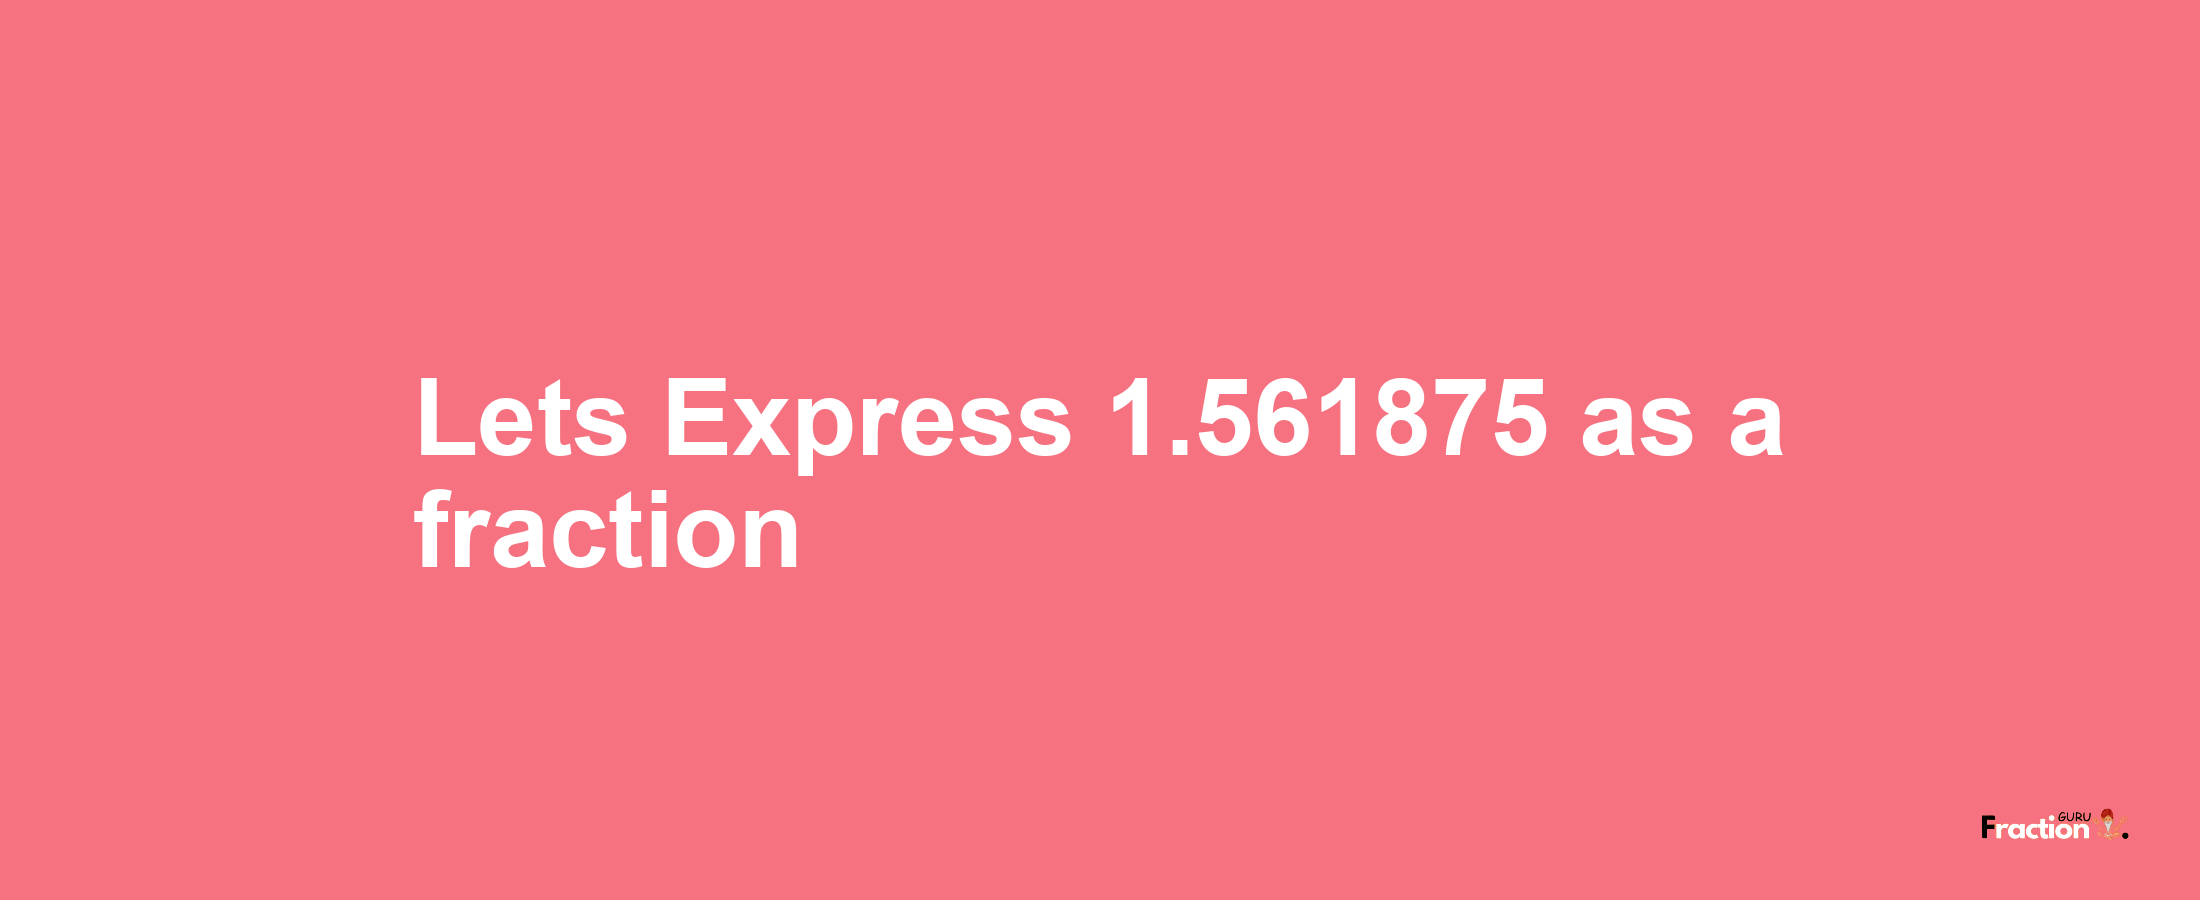 Lets Express 1.561875 as afraction